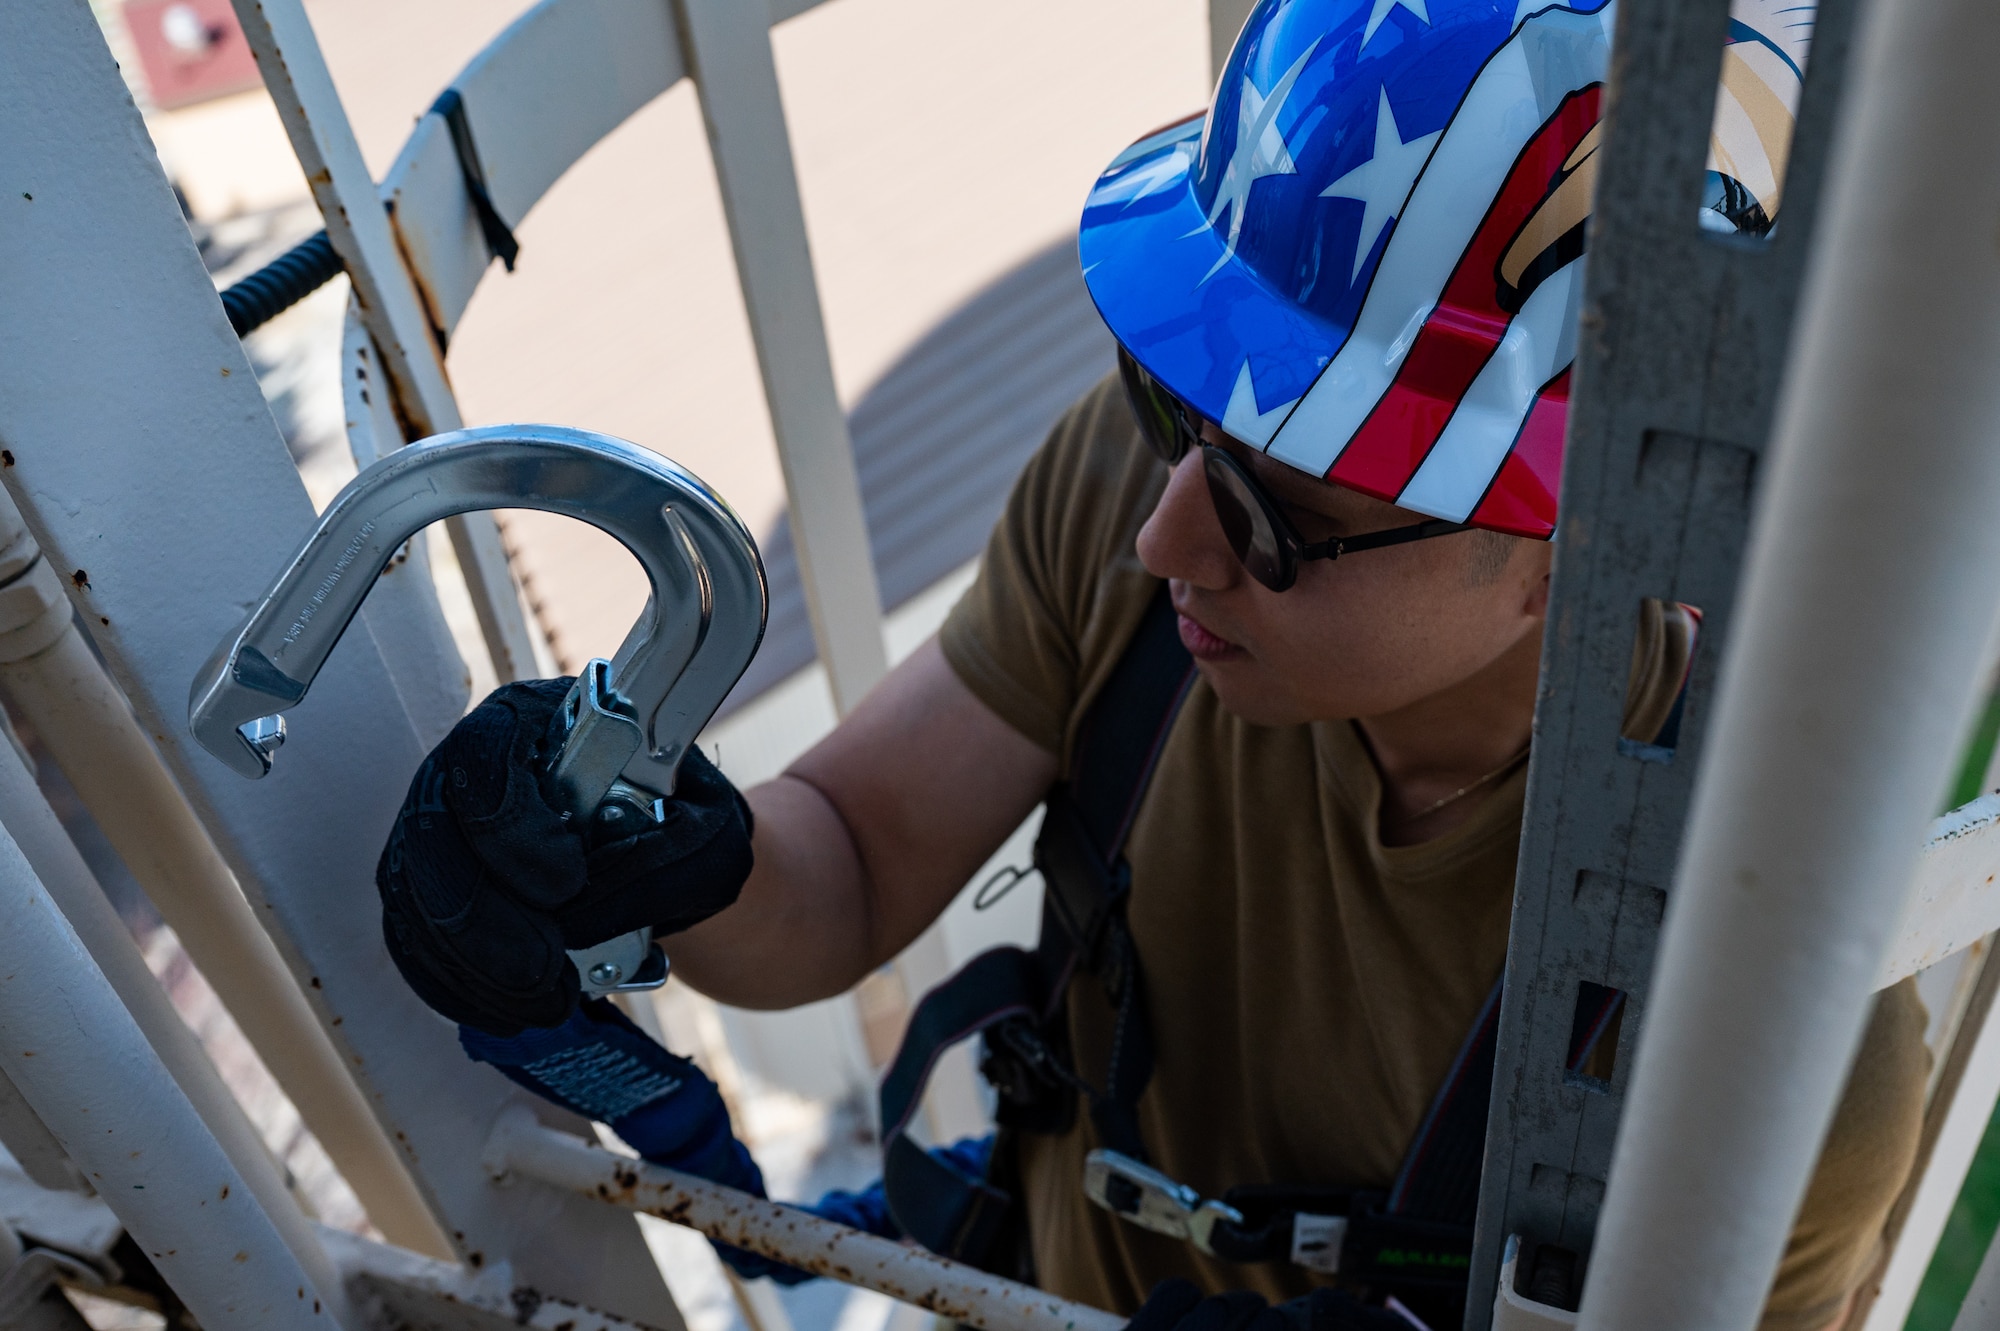 Lt. Col. John Kim secures his safety harness while scaling a water tower at Kunsan Air Base.